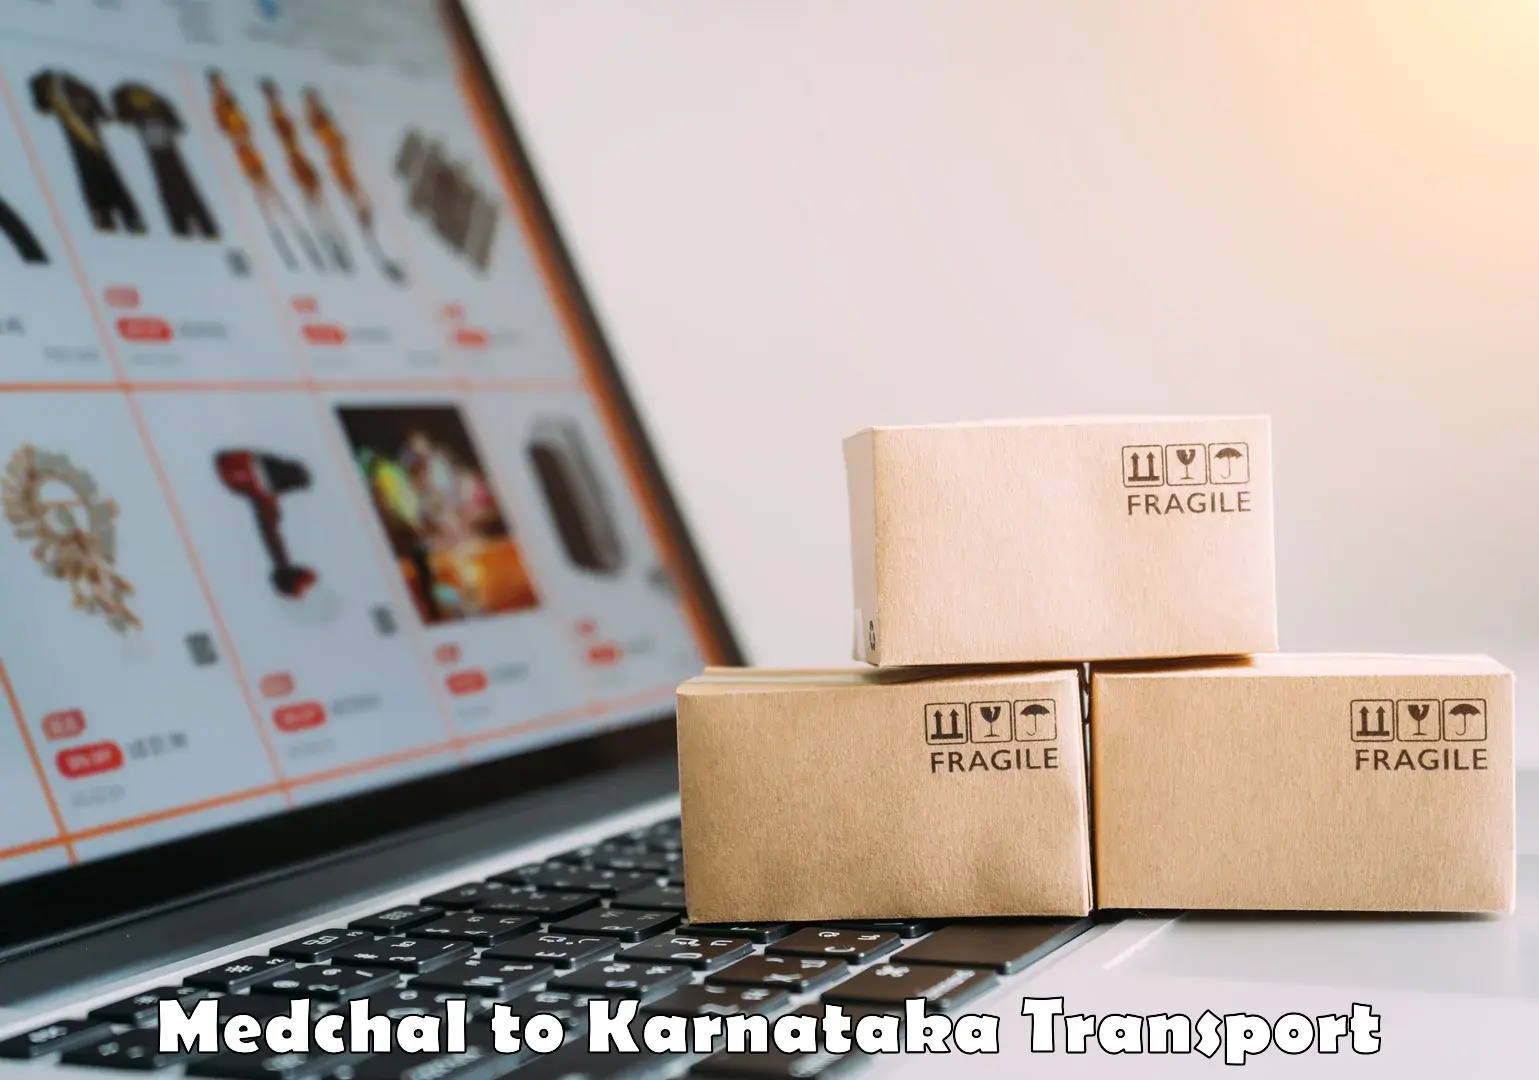 Truck transport companies in India Medchal to Yellare